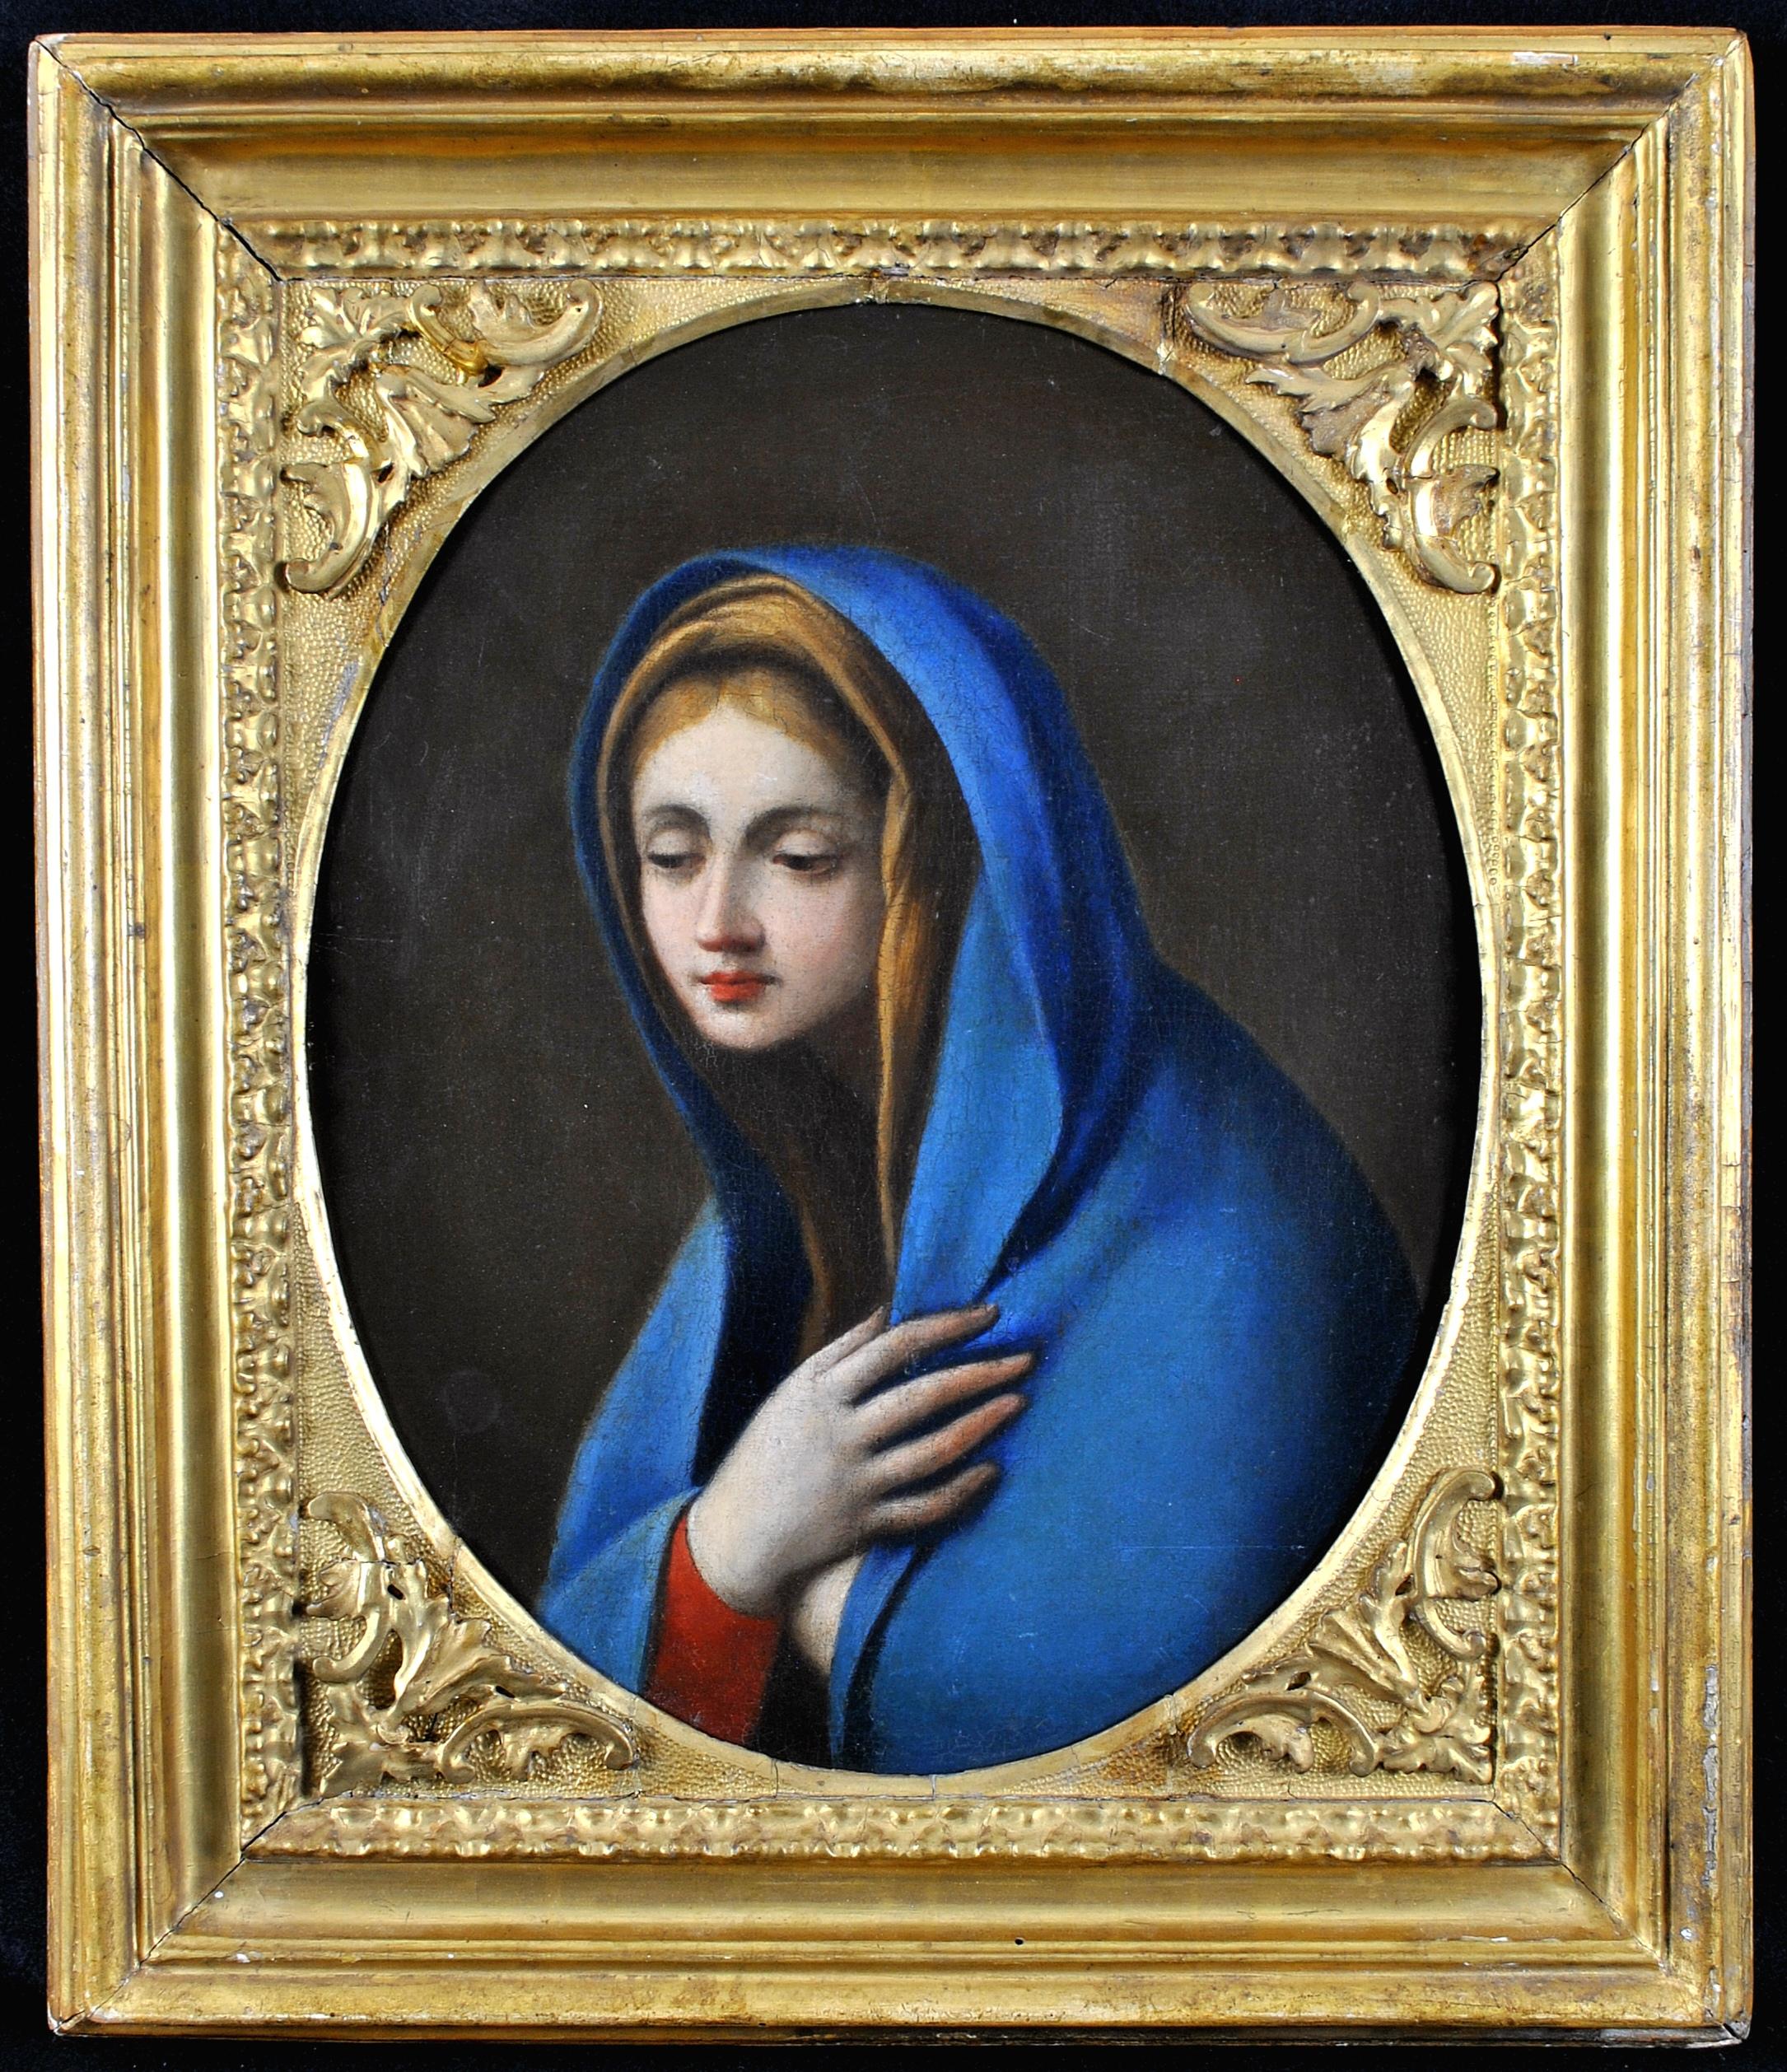 Carlo Maratta (circle) Figurative Painting - The Virgin in Adoration - 17th Century Italian Old Master Religious Oil Painting